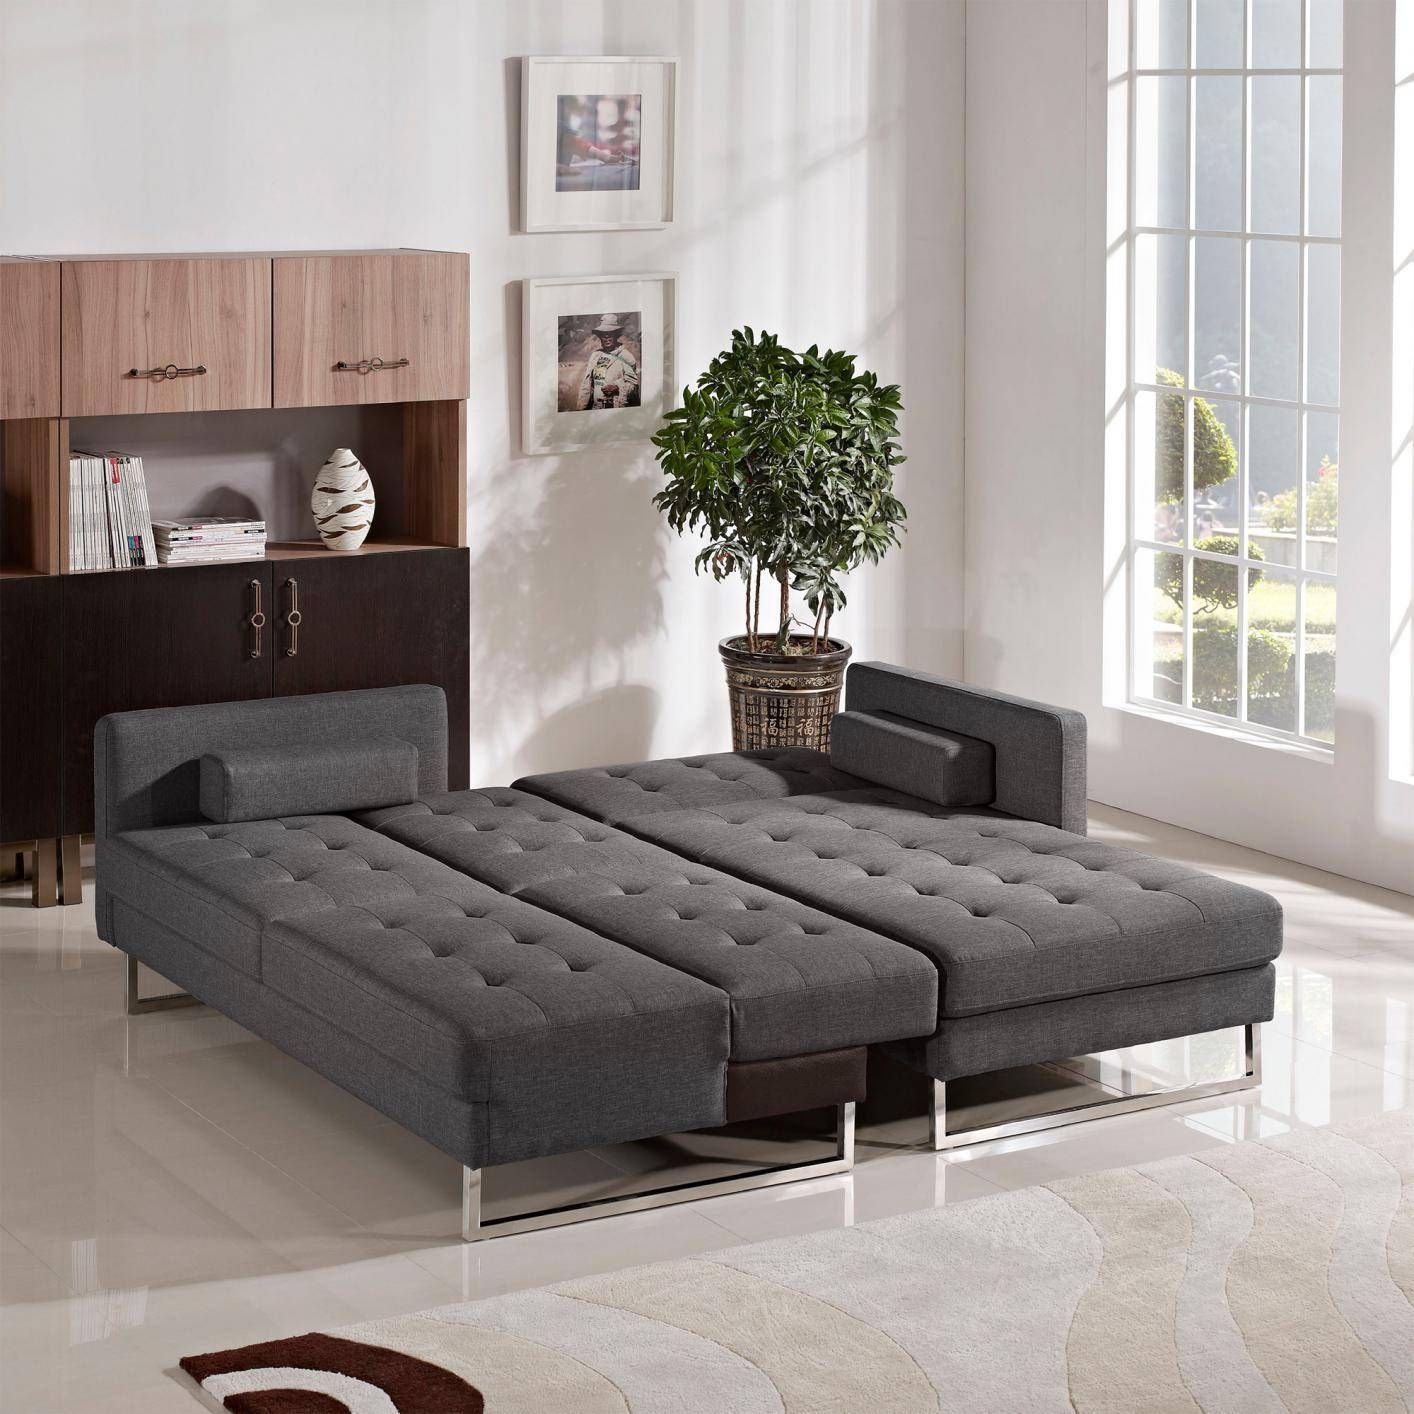 Opus Grey Fabric Sectional Sofa Bed – Steal A Sofa Furniture Inside Sectional Sofa Beds (View 29 of 30)